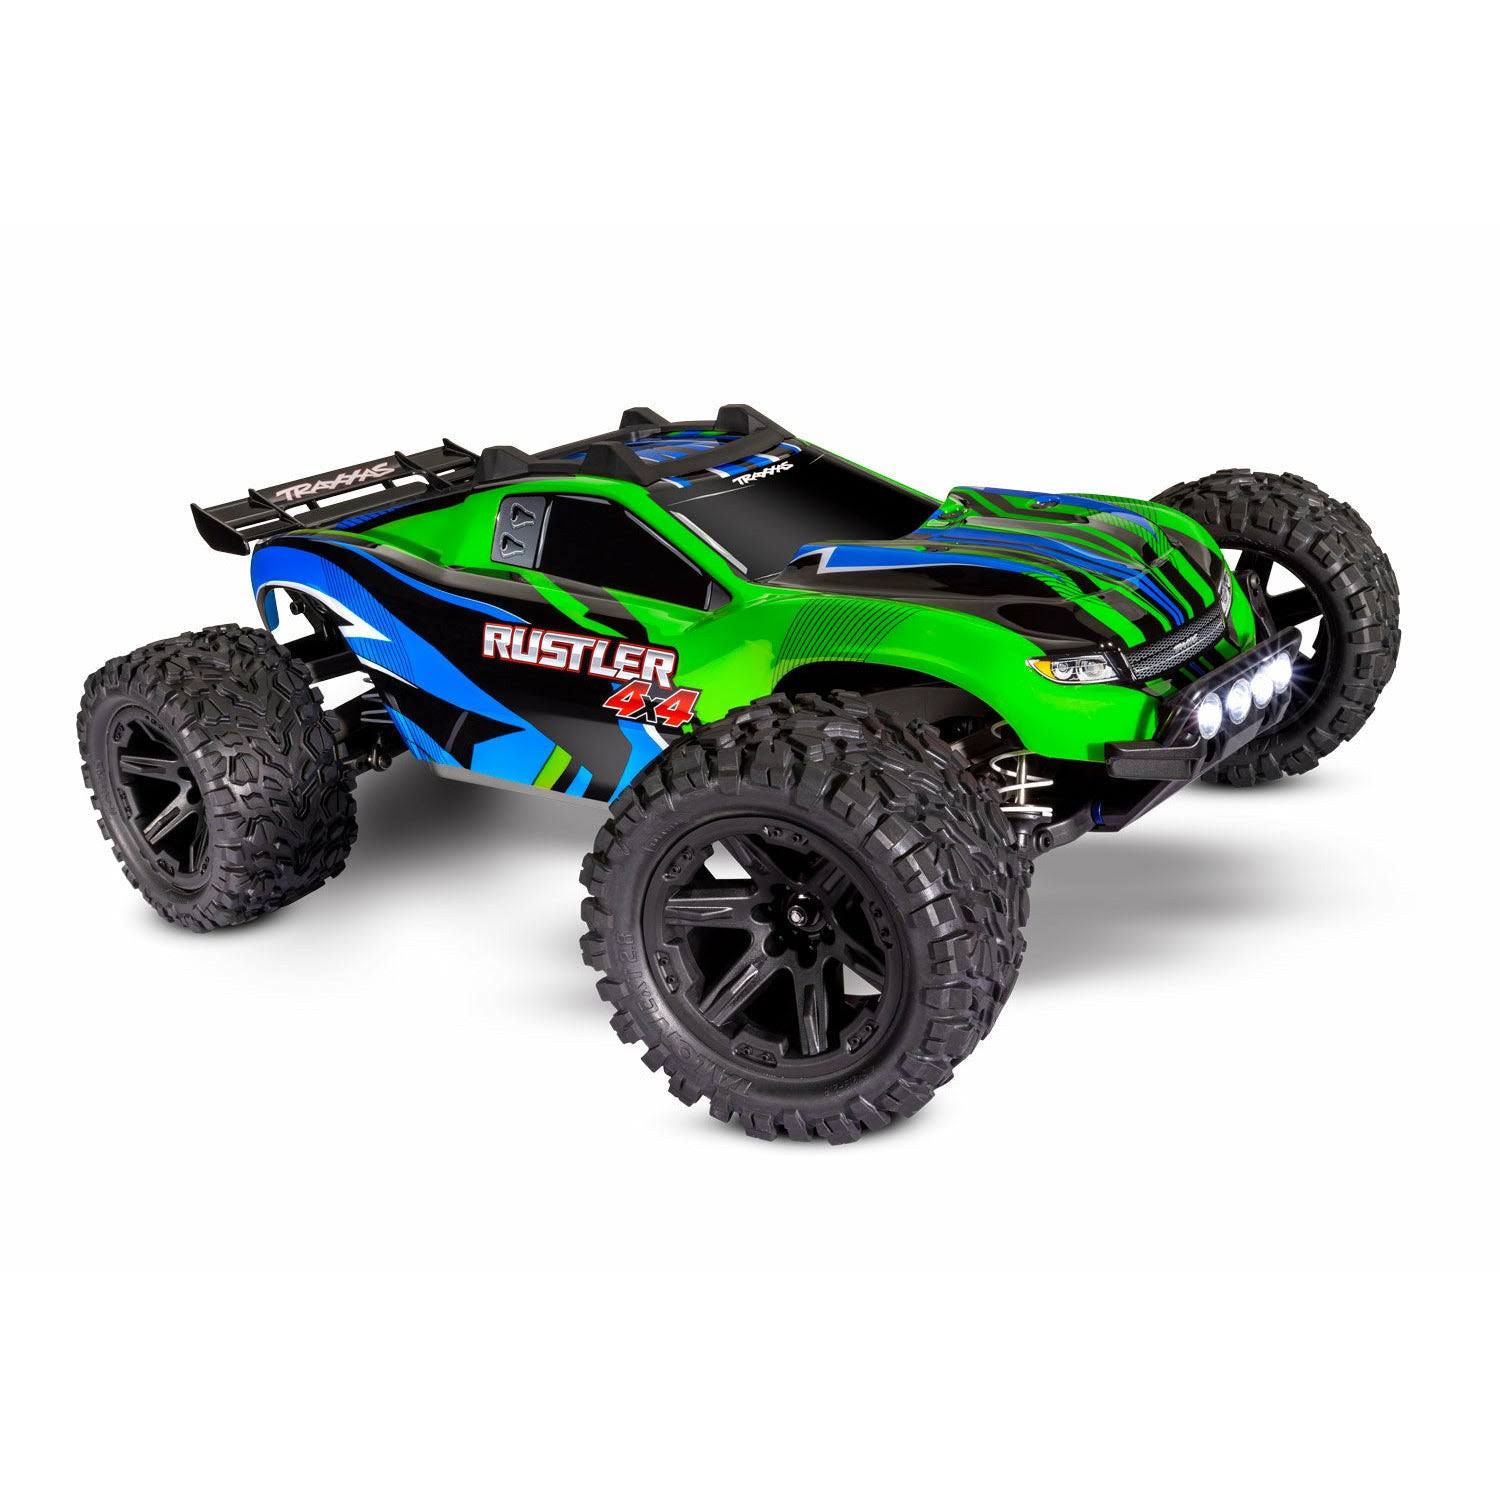 Traxxas 1/10 Rustler 4x4 With LED Lights Green